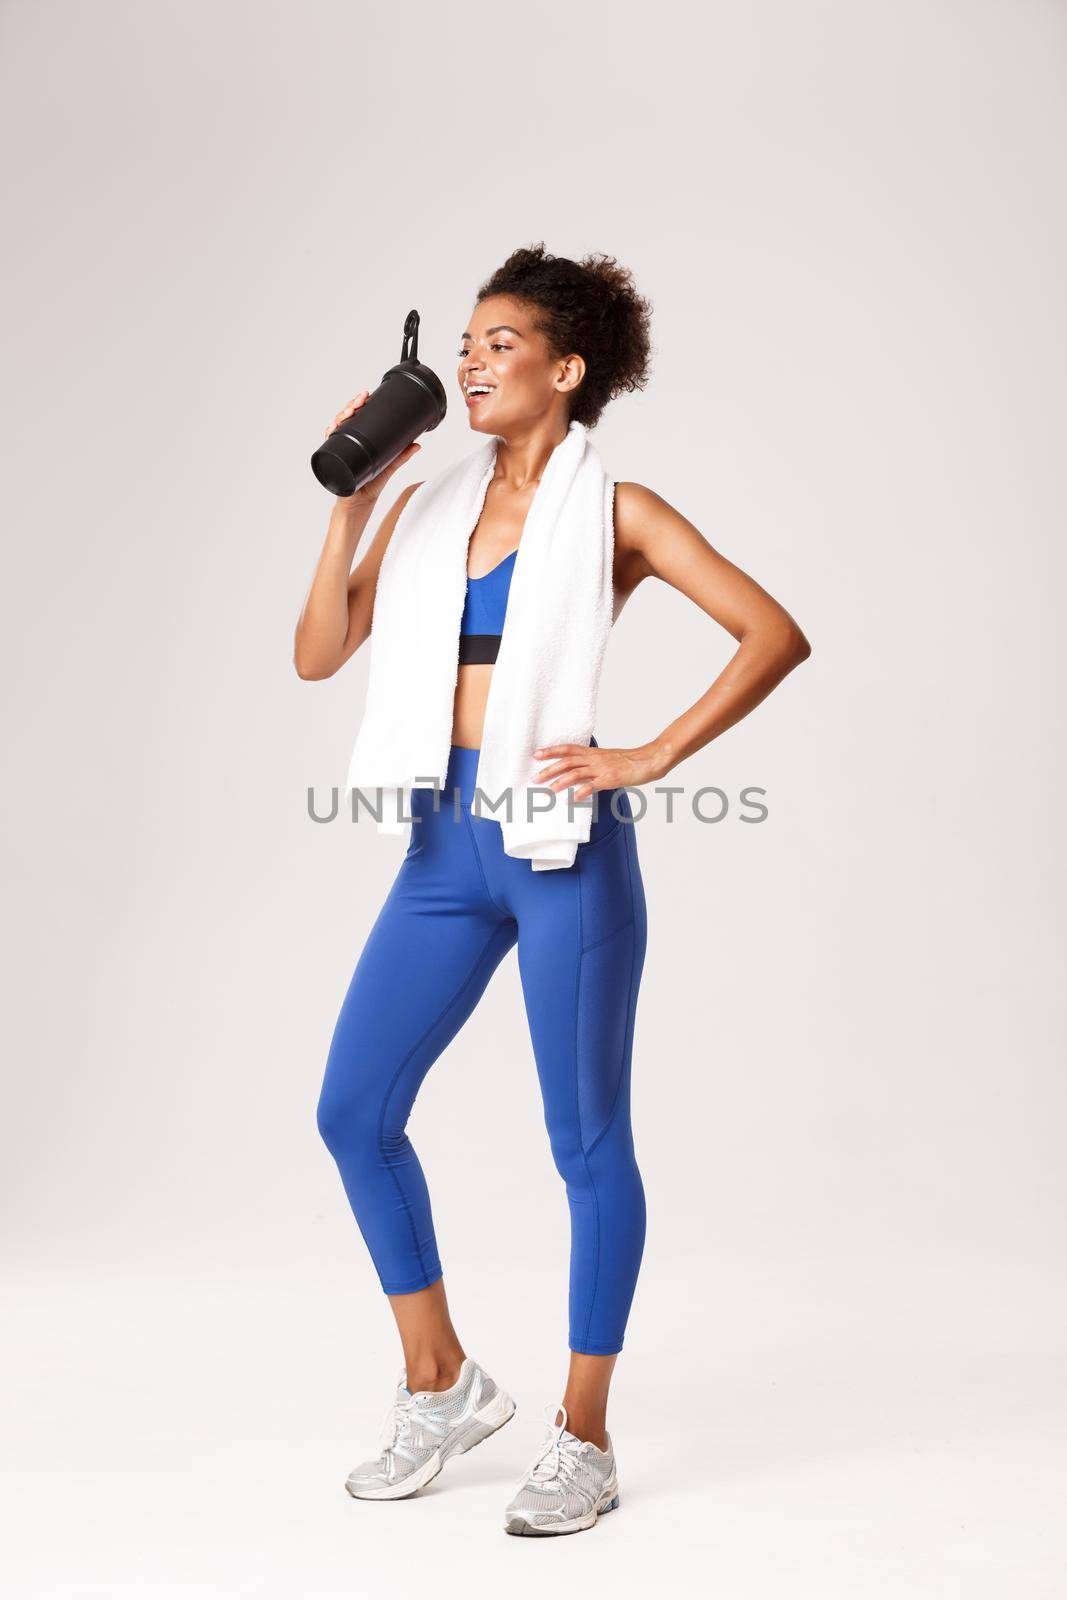 Full length of smiling female athelte in blue sport outfit, drinking protein or water from bottle, standing against white background with towel, finish workout.